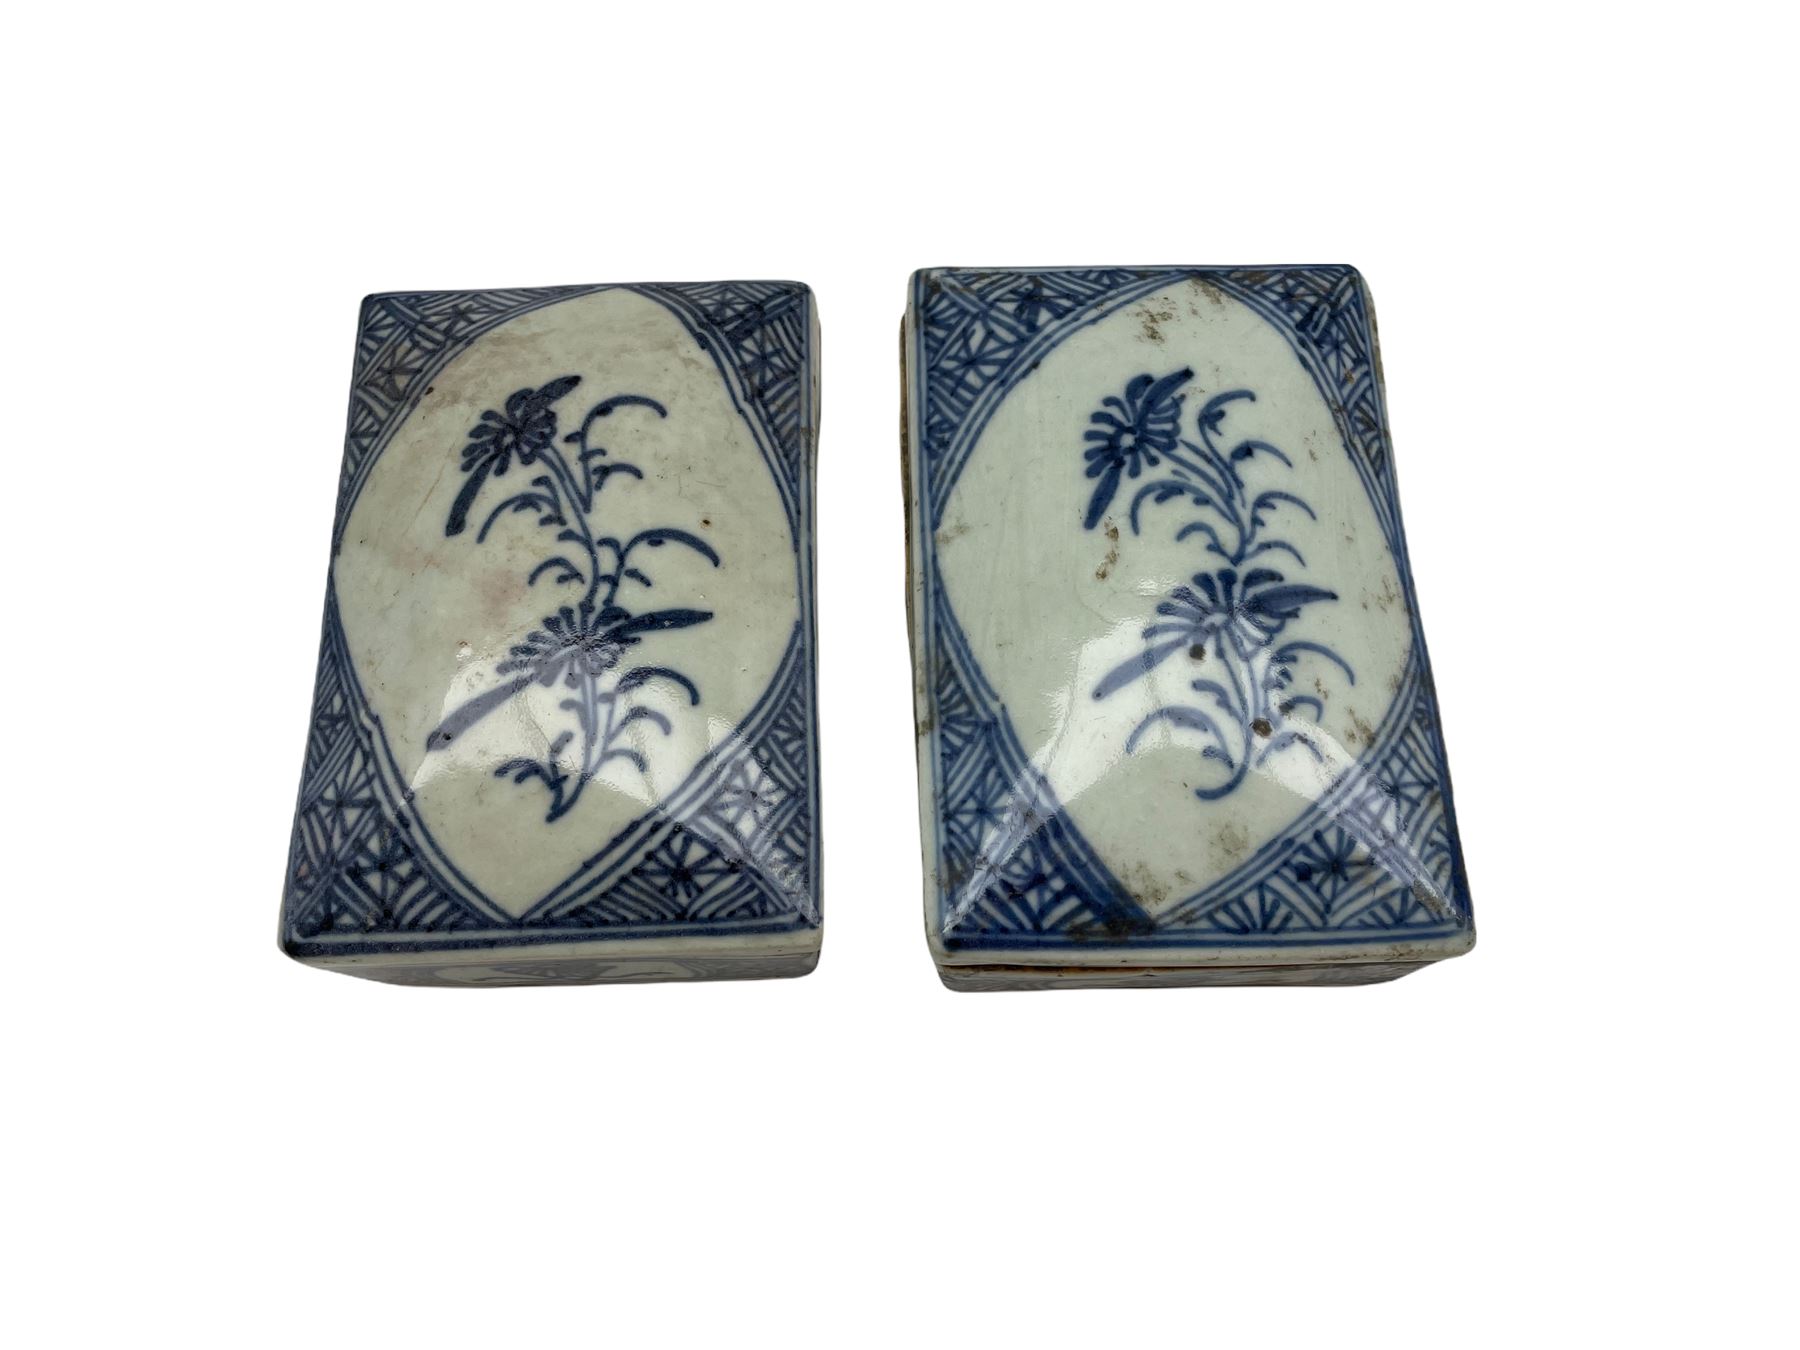 Matched pair of 18th/ 19th century Chinese blue and white rectangular boxes - Image 3 of 3